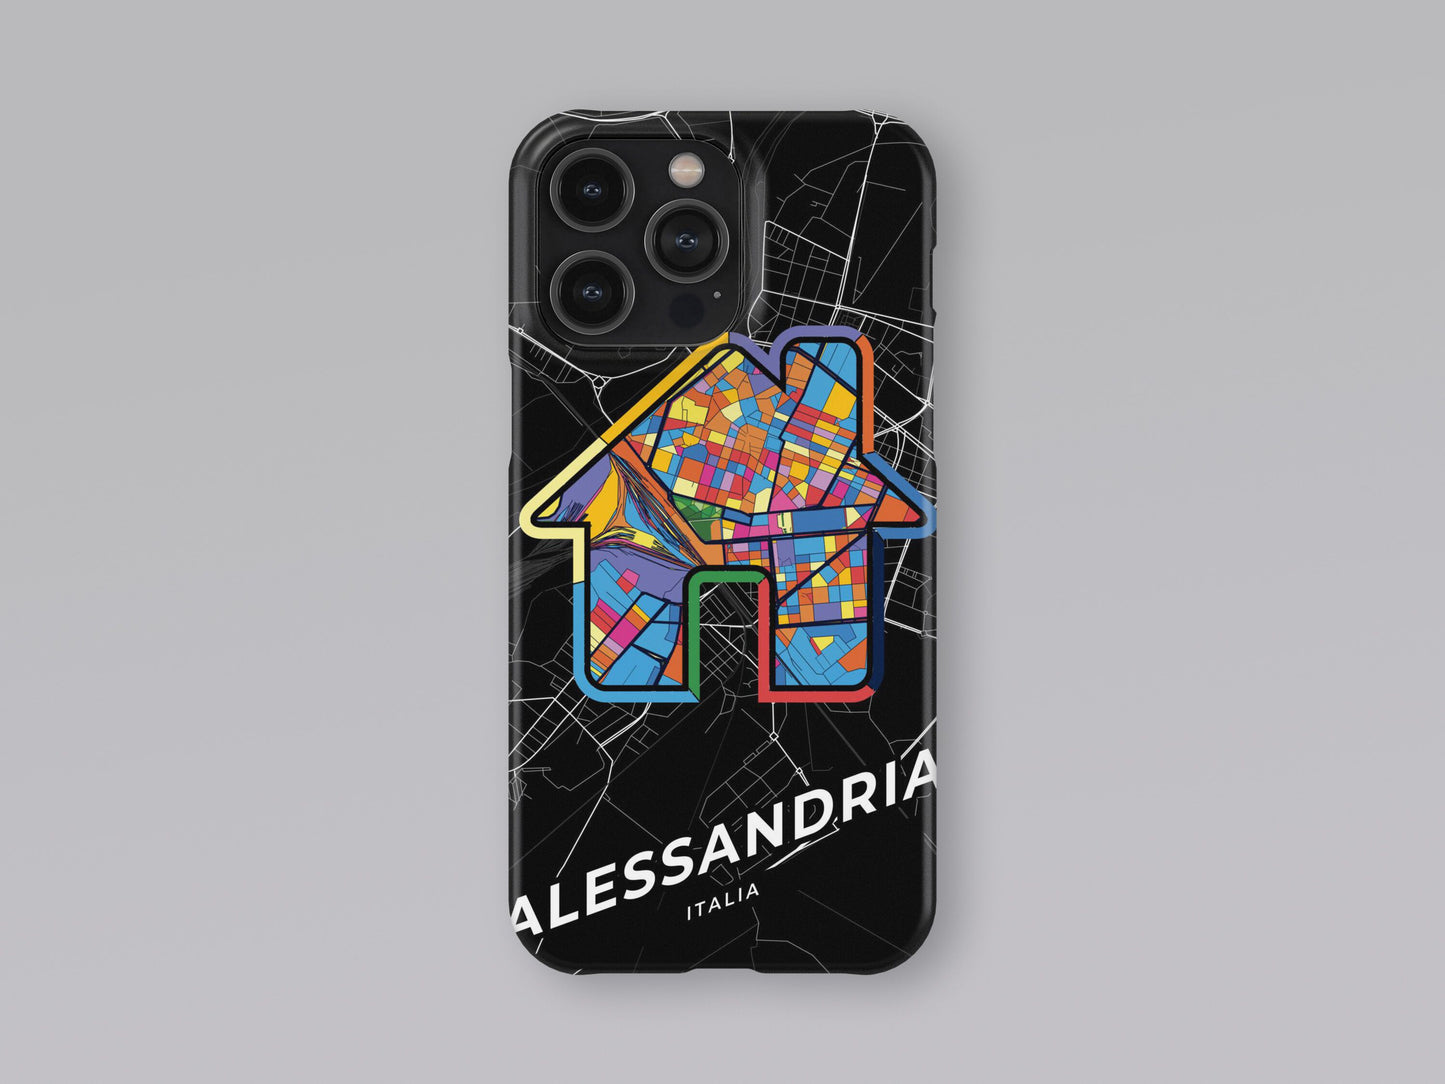 Alessandria Italy slim phone case with colorful icon. Birthday, wedding or housewarming gift. Couple match cases. 3